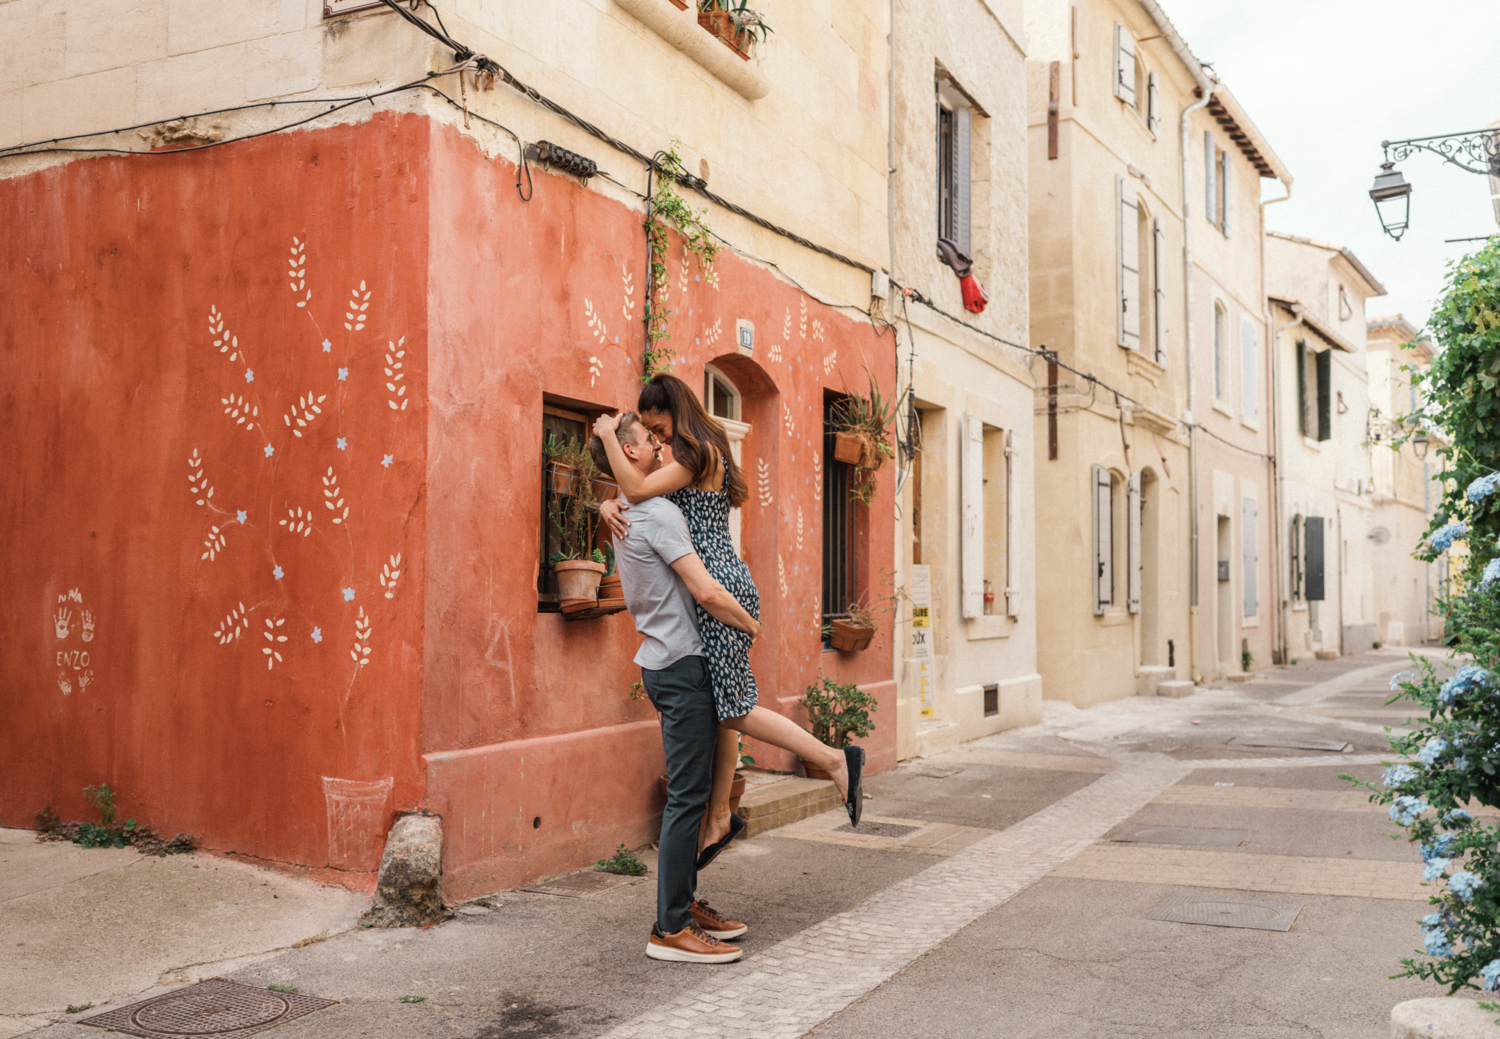 man lifts woman next to colorful building in arles, france